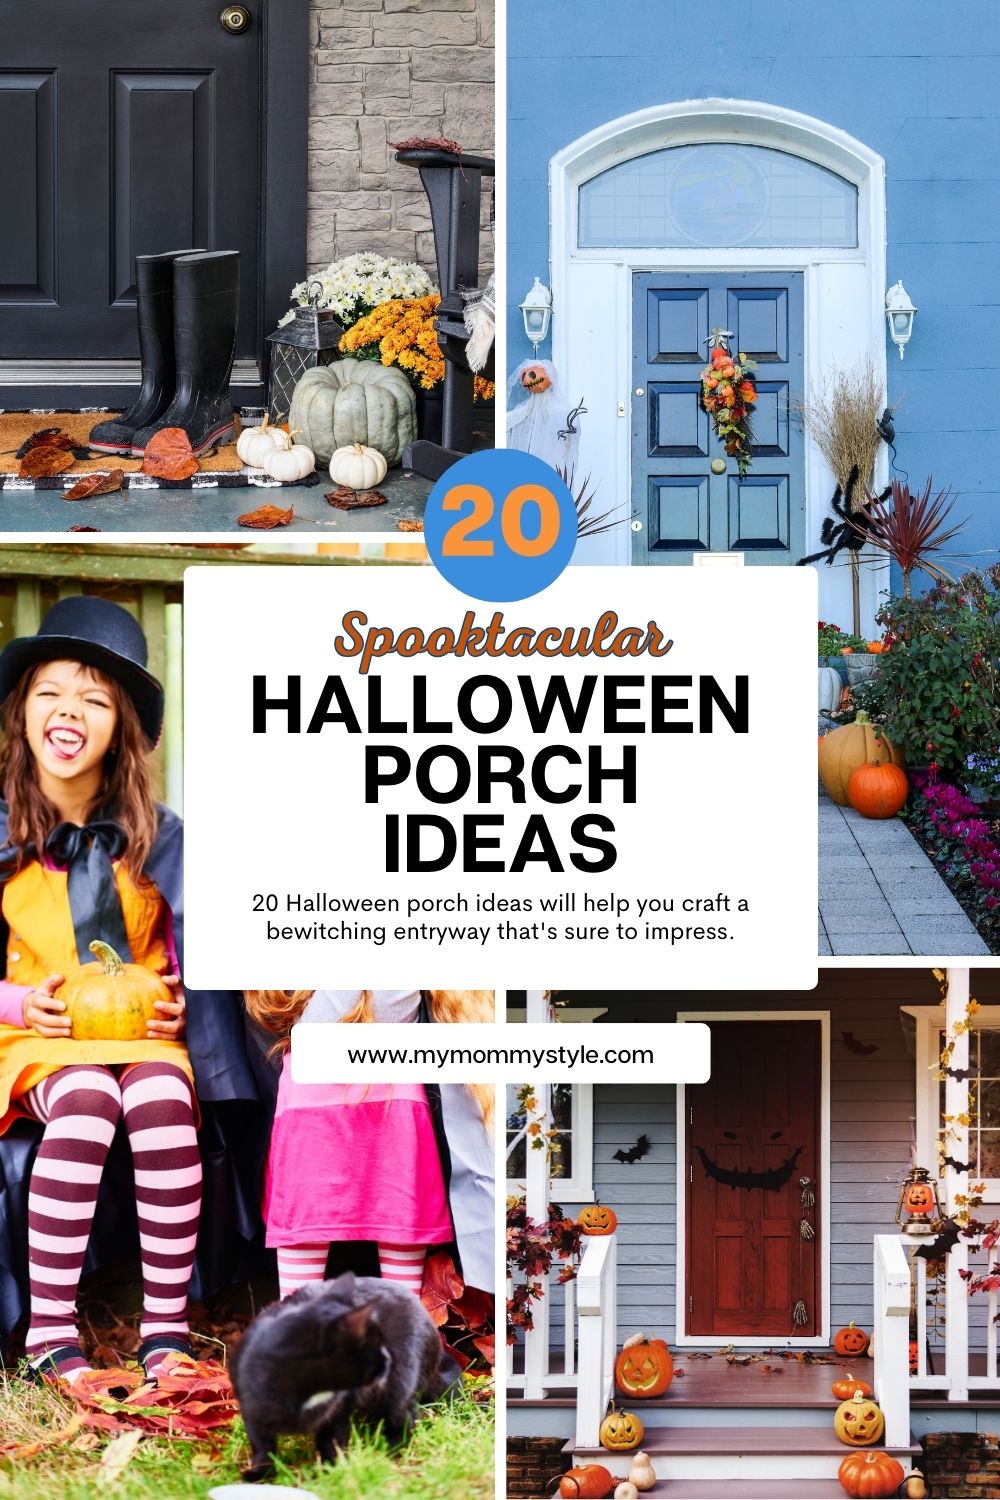 Transform your home's entryway into a hauntingly beautiful spectacle with our 20 spooktacular Halloween porch decor ideas. Elevate your Halloween porch decor and leave visitors spellbound! via @mymommystyle